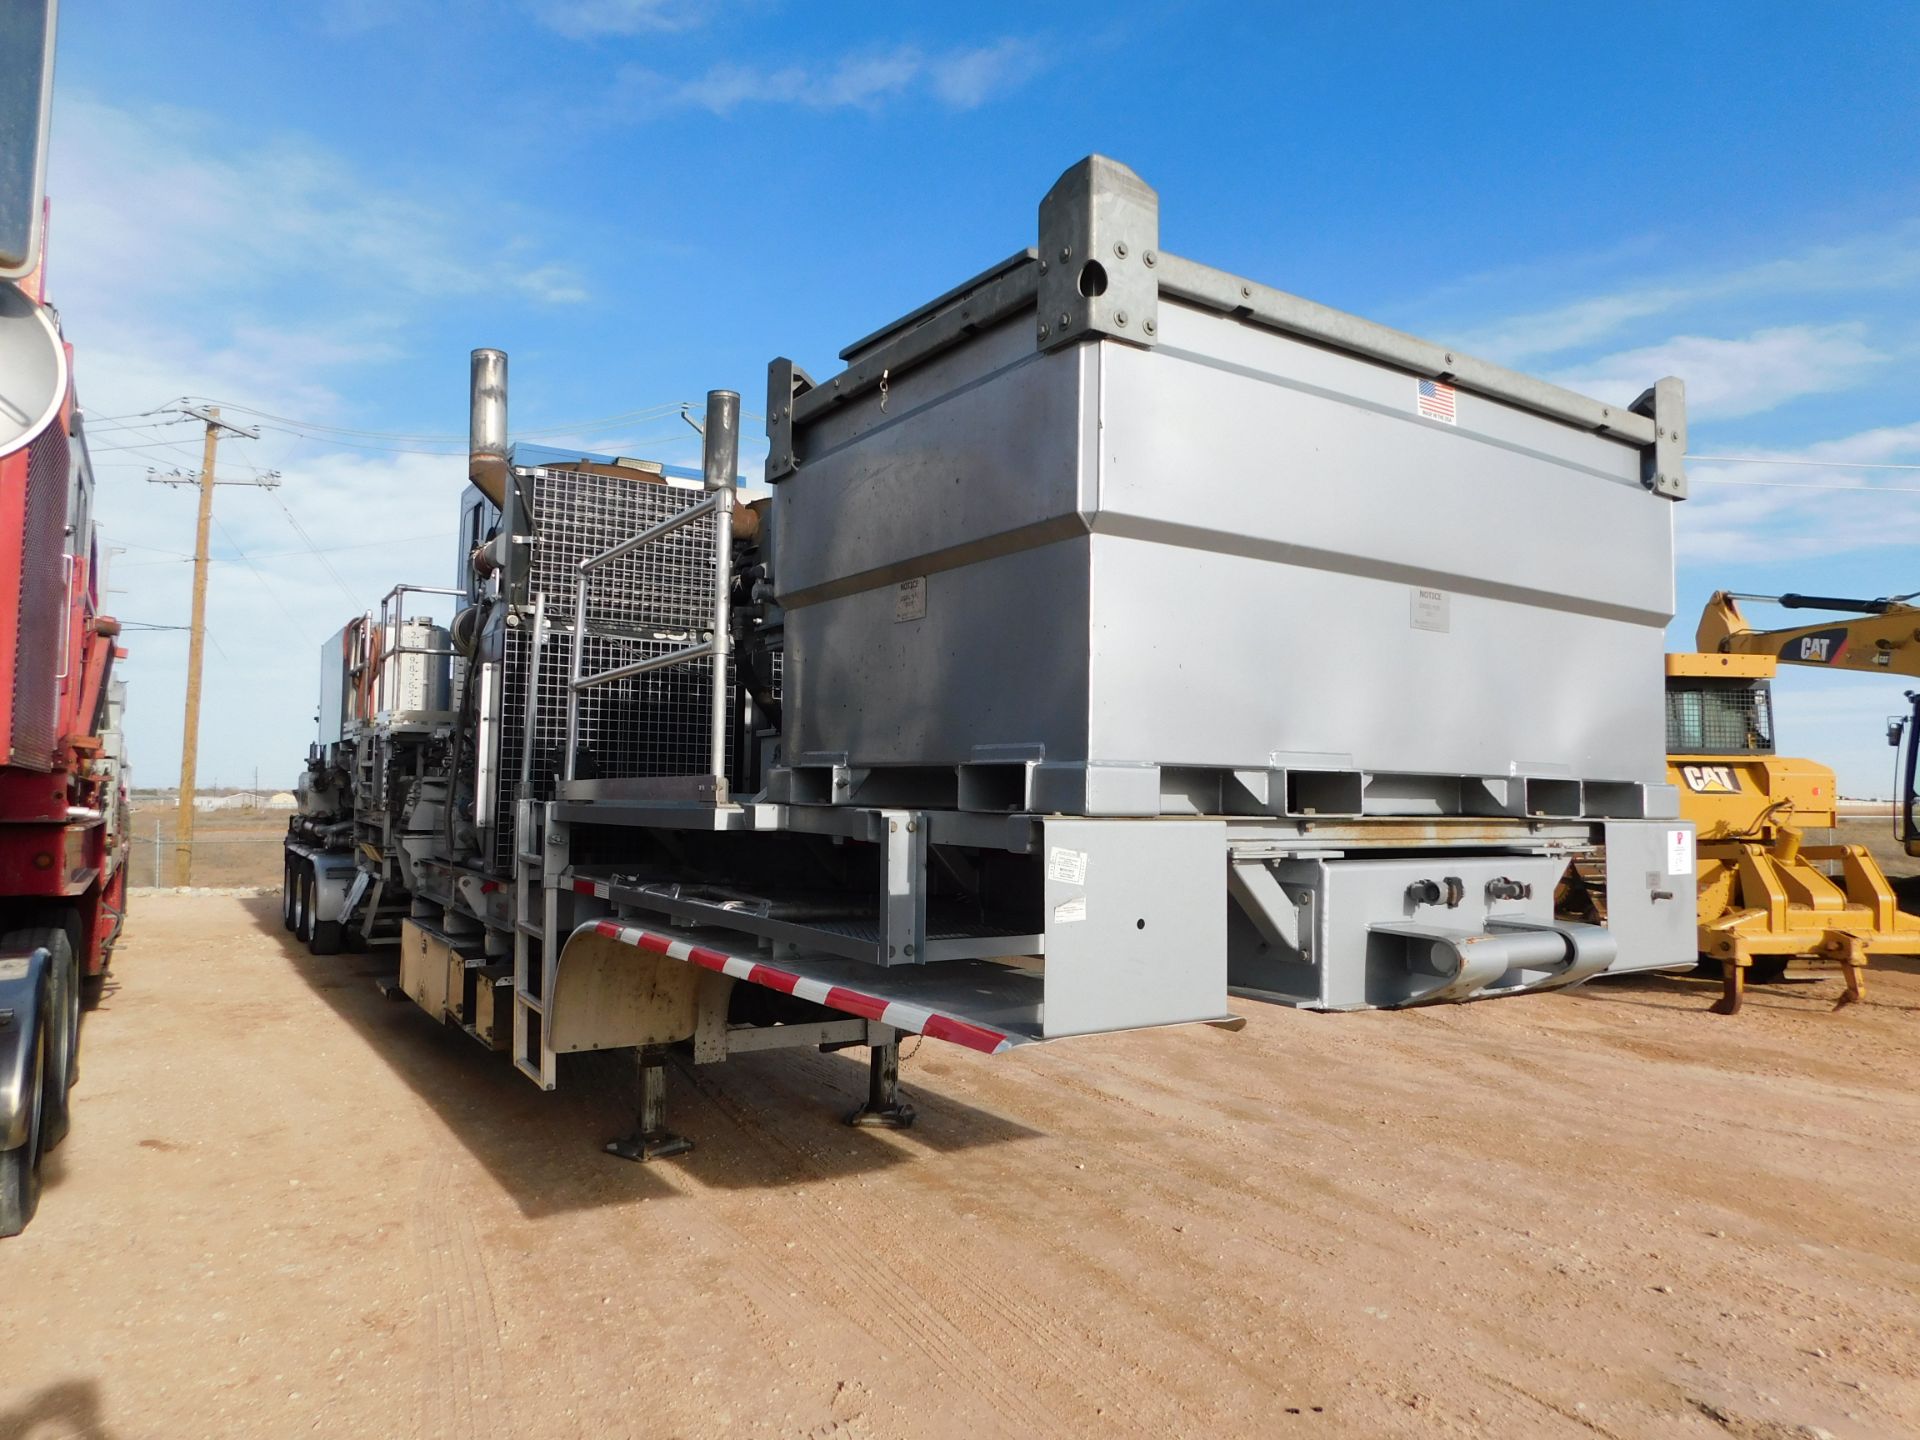 Located in YARD 1 - Midland, TX (X) 2018 PREMIER COIL SOLUTIONS, MODEL - FTT-086 - Image 25 of 25